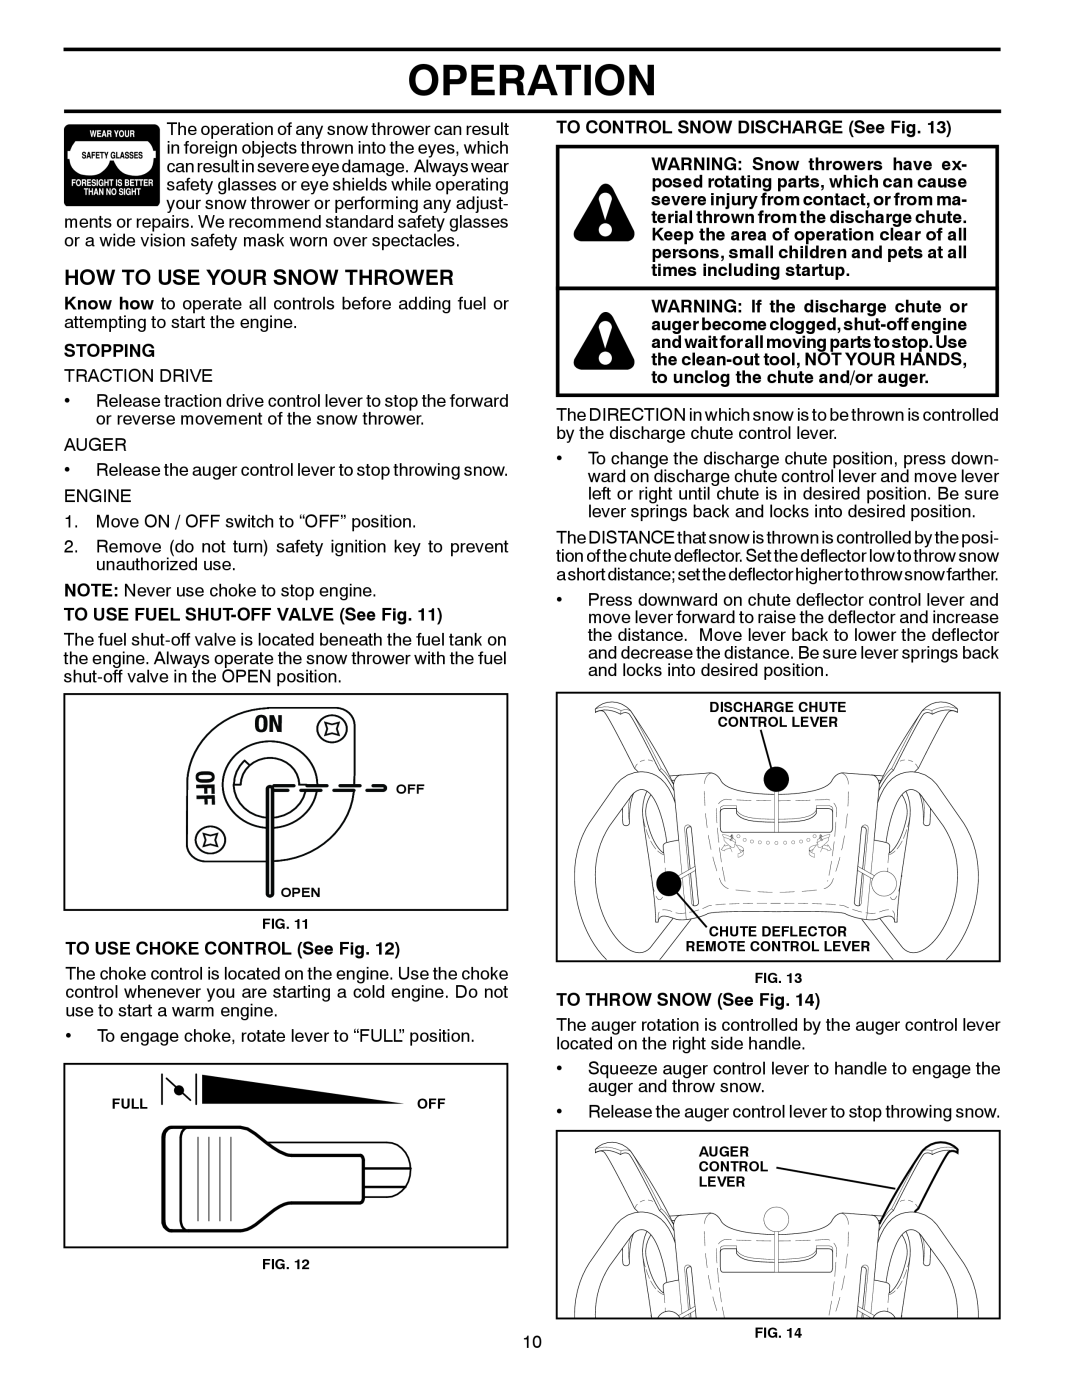 Poulan 429896 How To Use Your Snow Thrower, Operation, Stopping, TO USE FUEL SHUT-OFF VALVE See Fig, TO THROW SNOW See Fig 